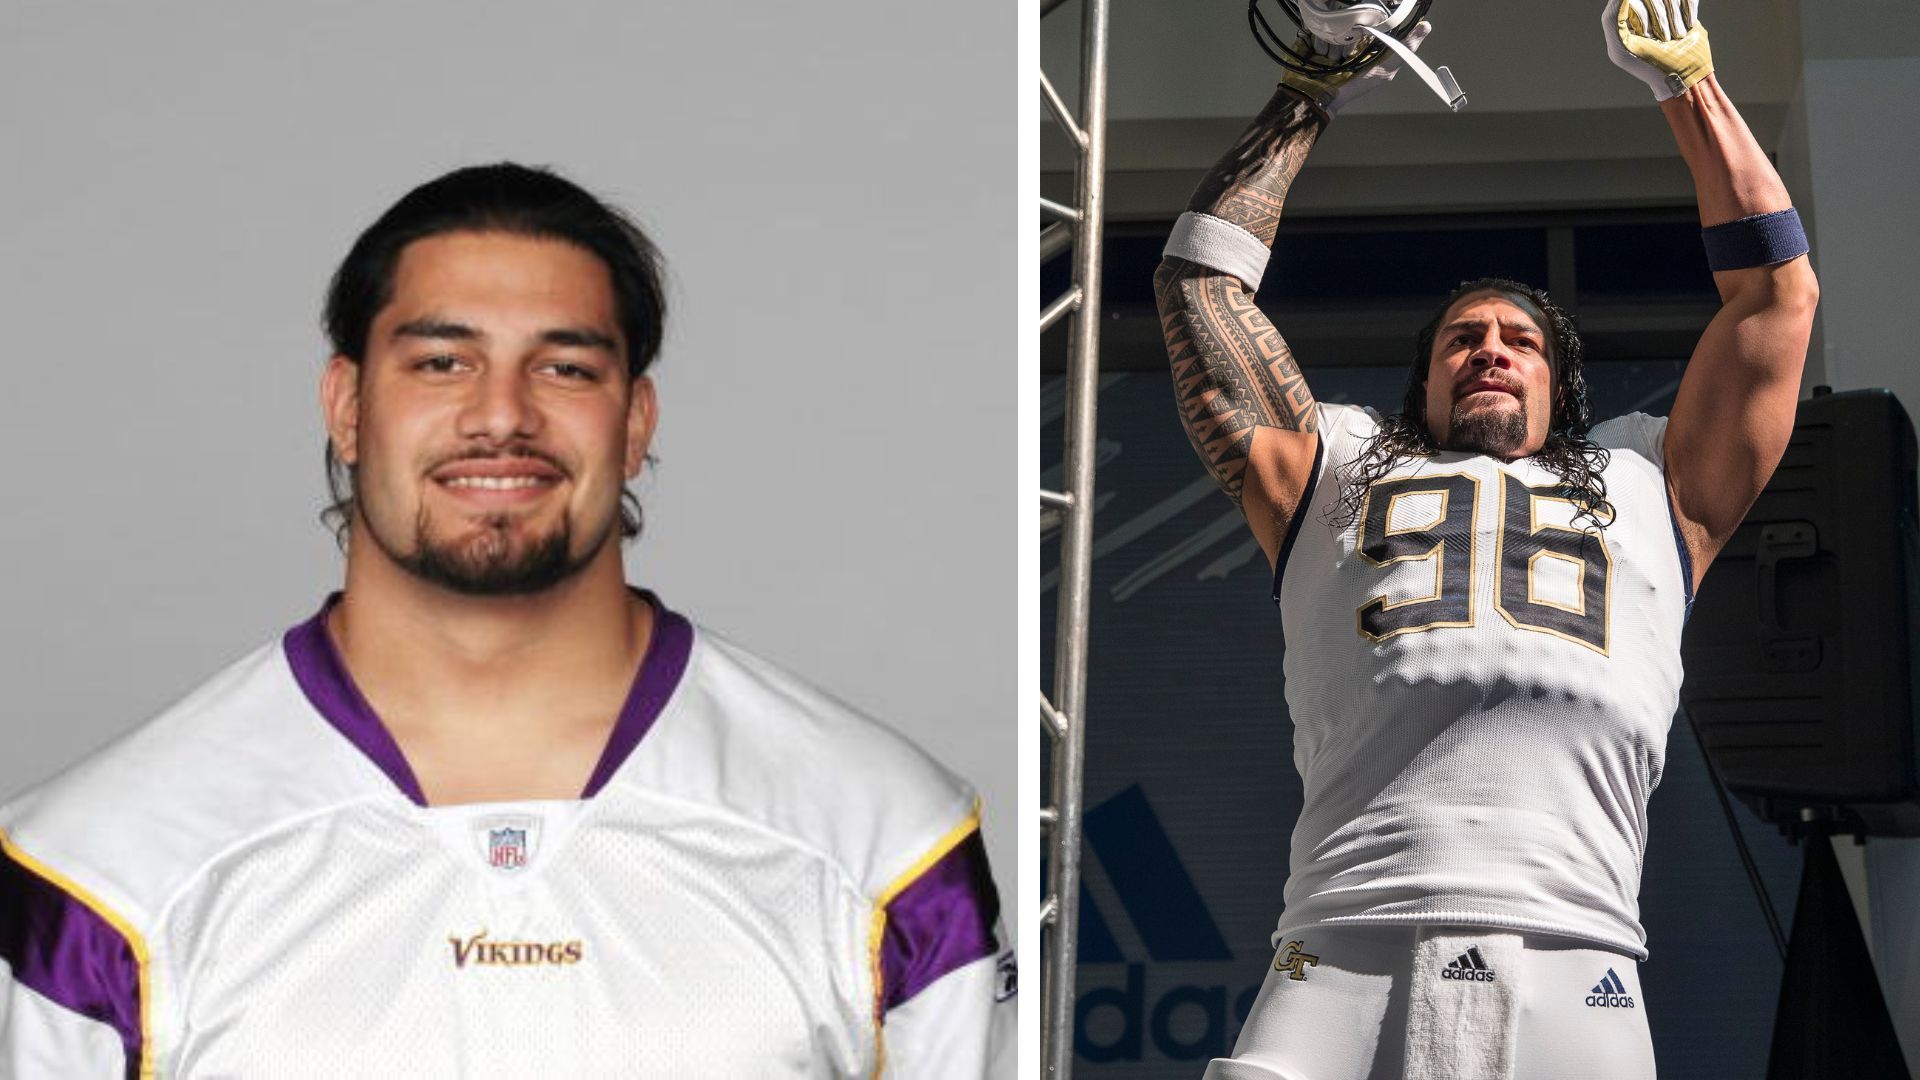 Roman in the uniform of the Minnesota Vikings and Yellow Jackets, respectively